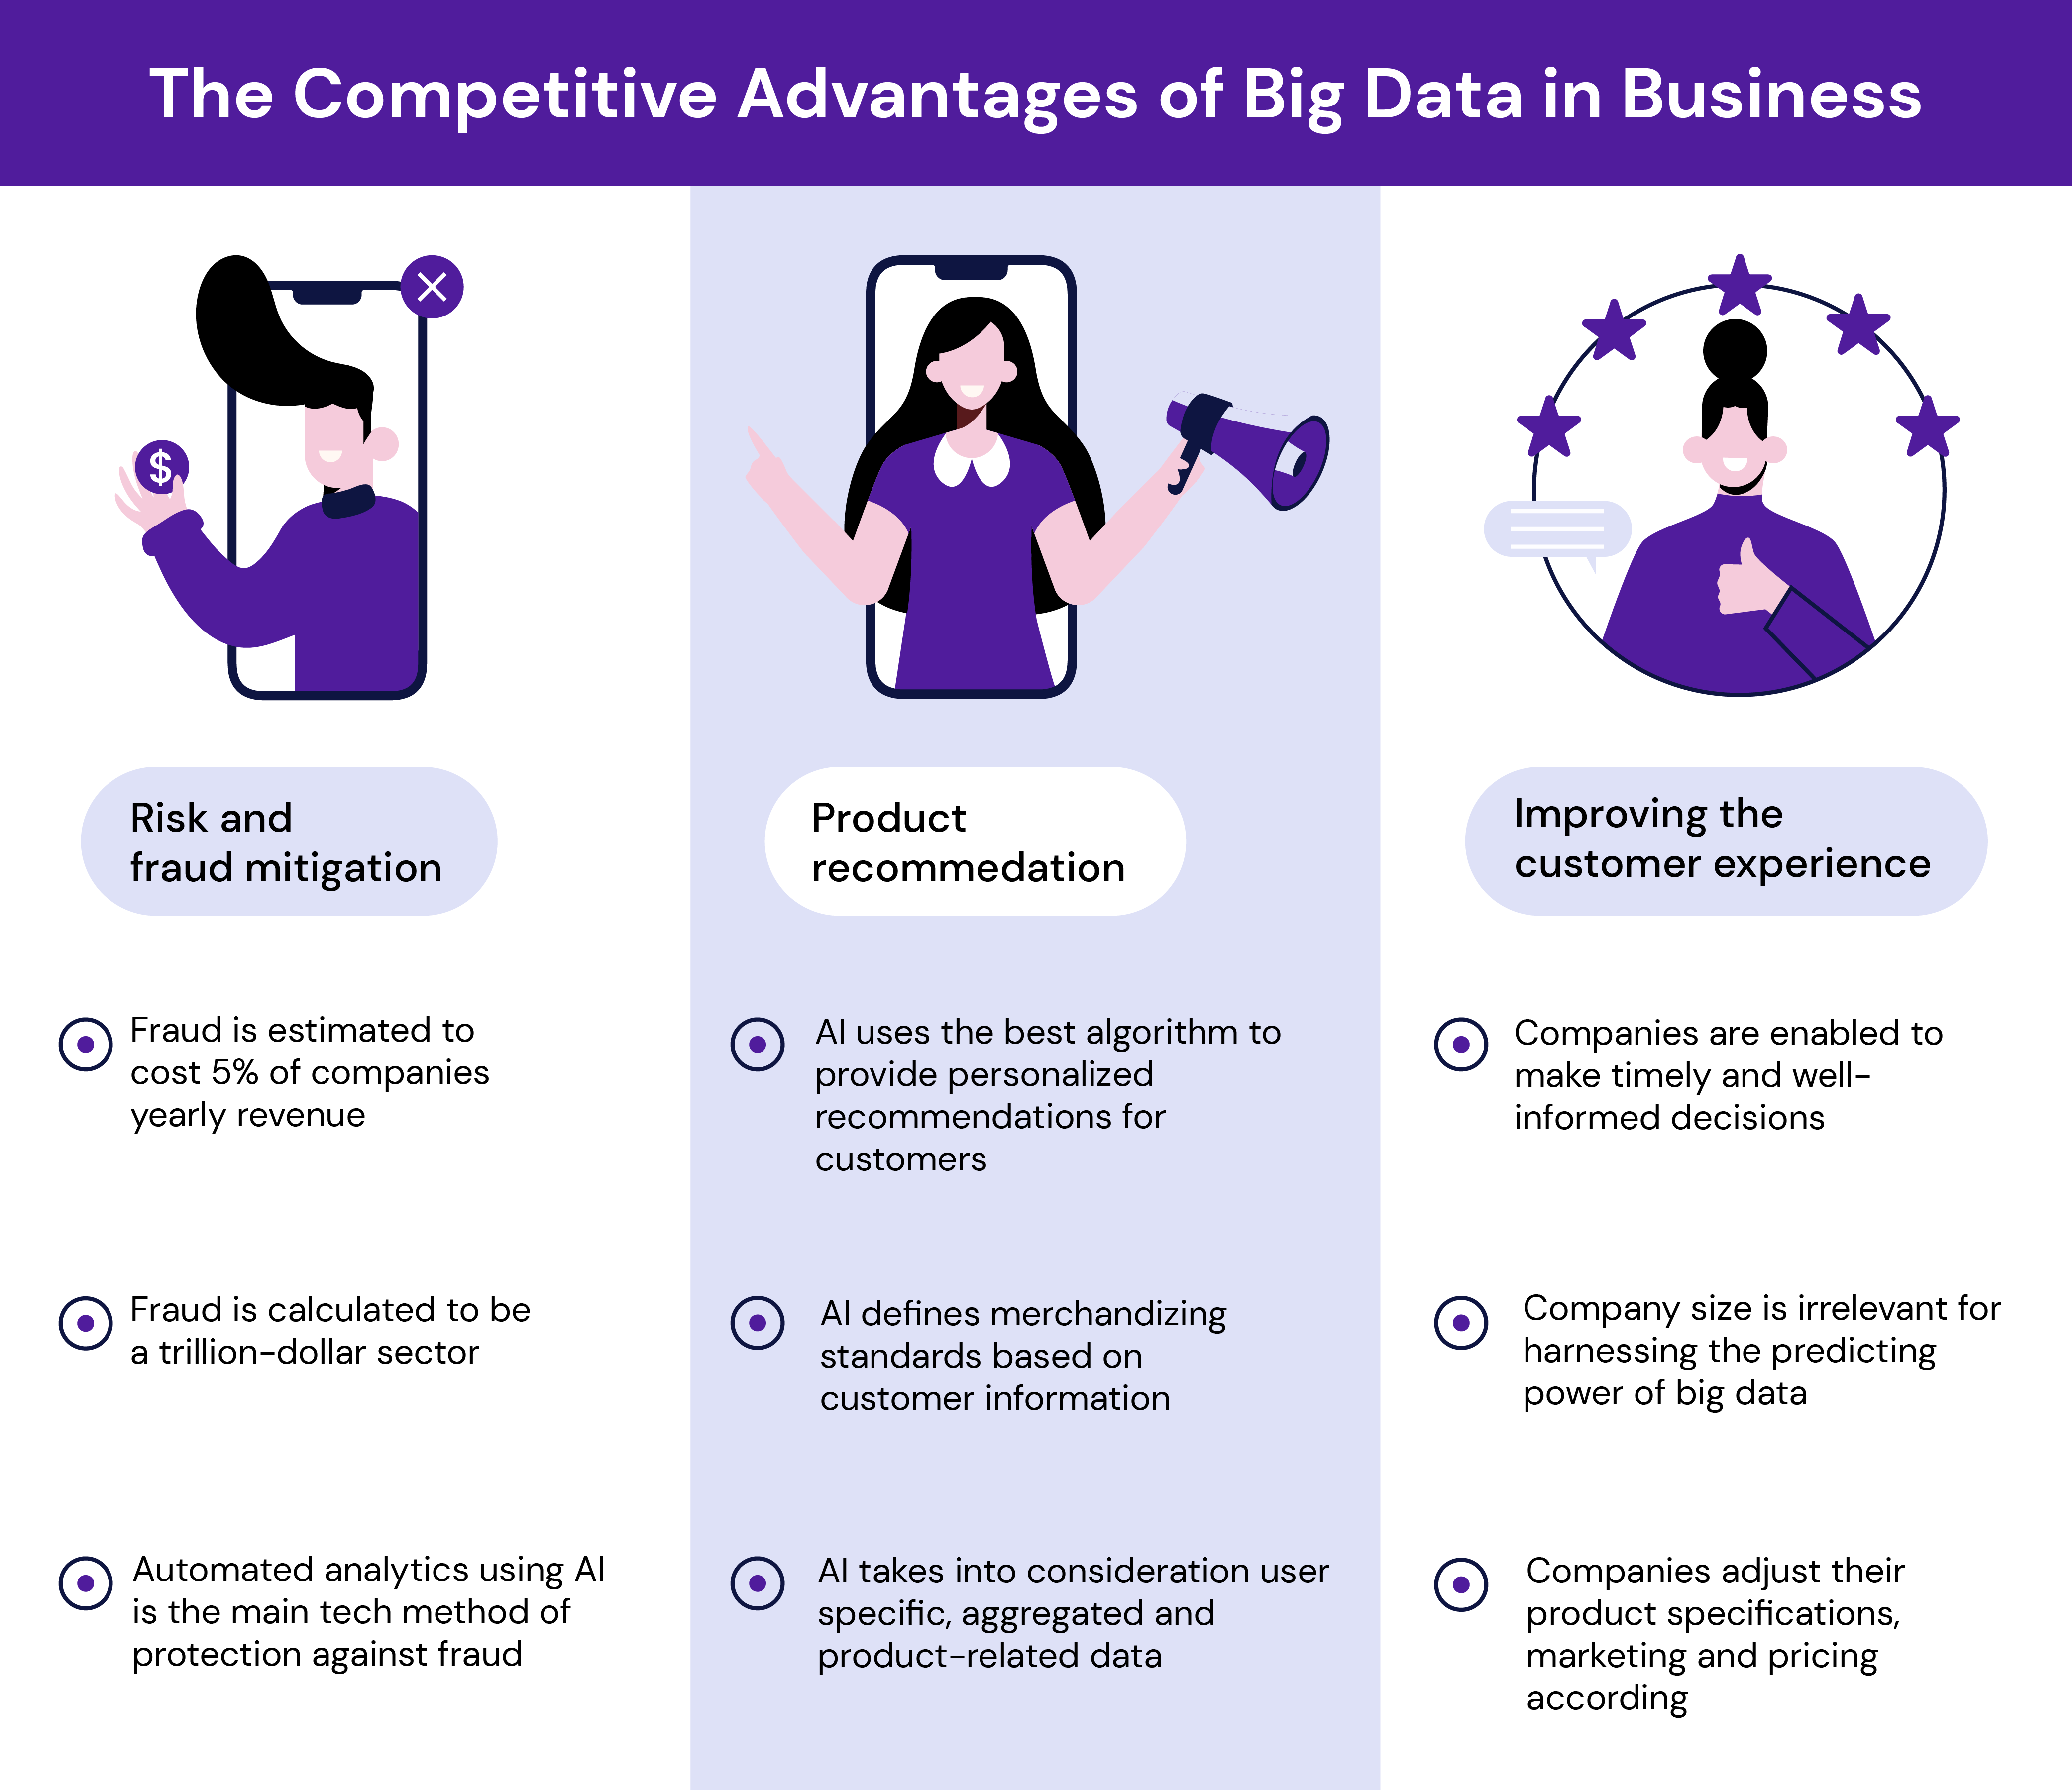 The Competitive Advantages of Big Data in Business